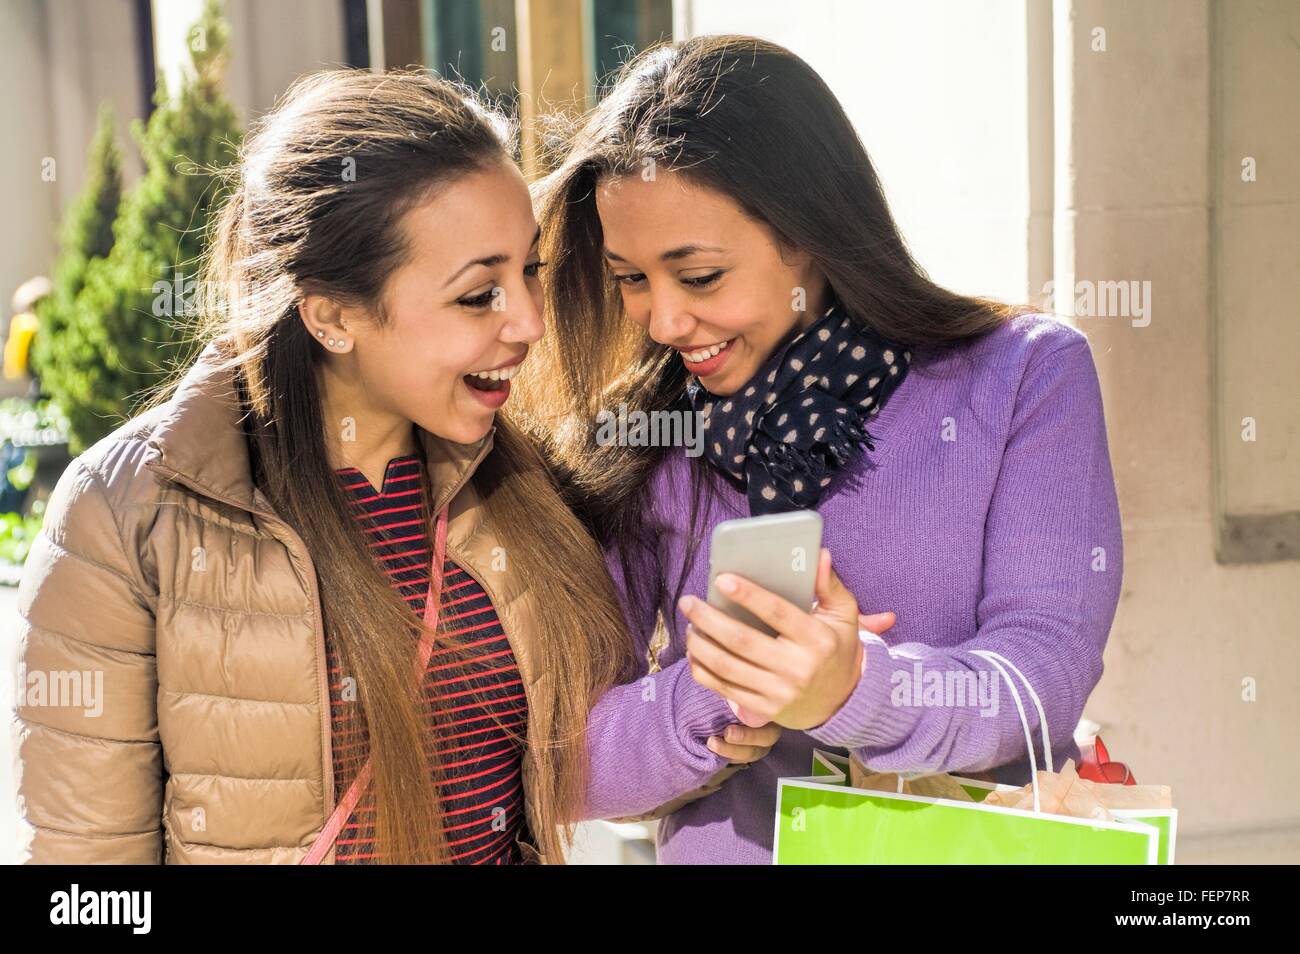 Young female adult twins in city with shopping bags laughing at smartphone text Stock Photo